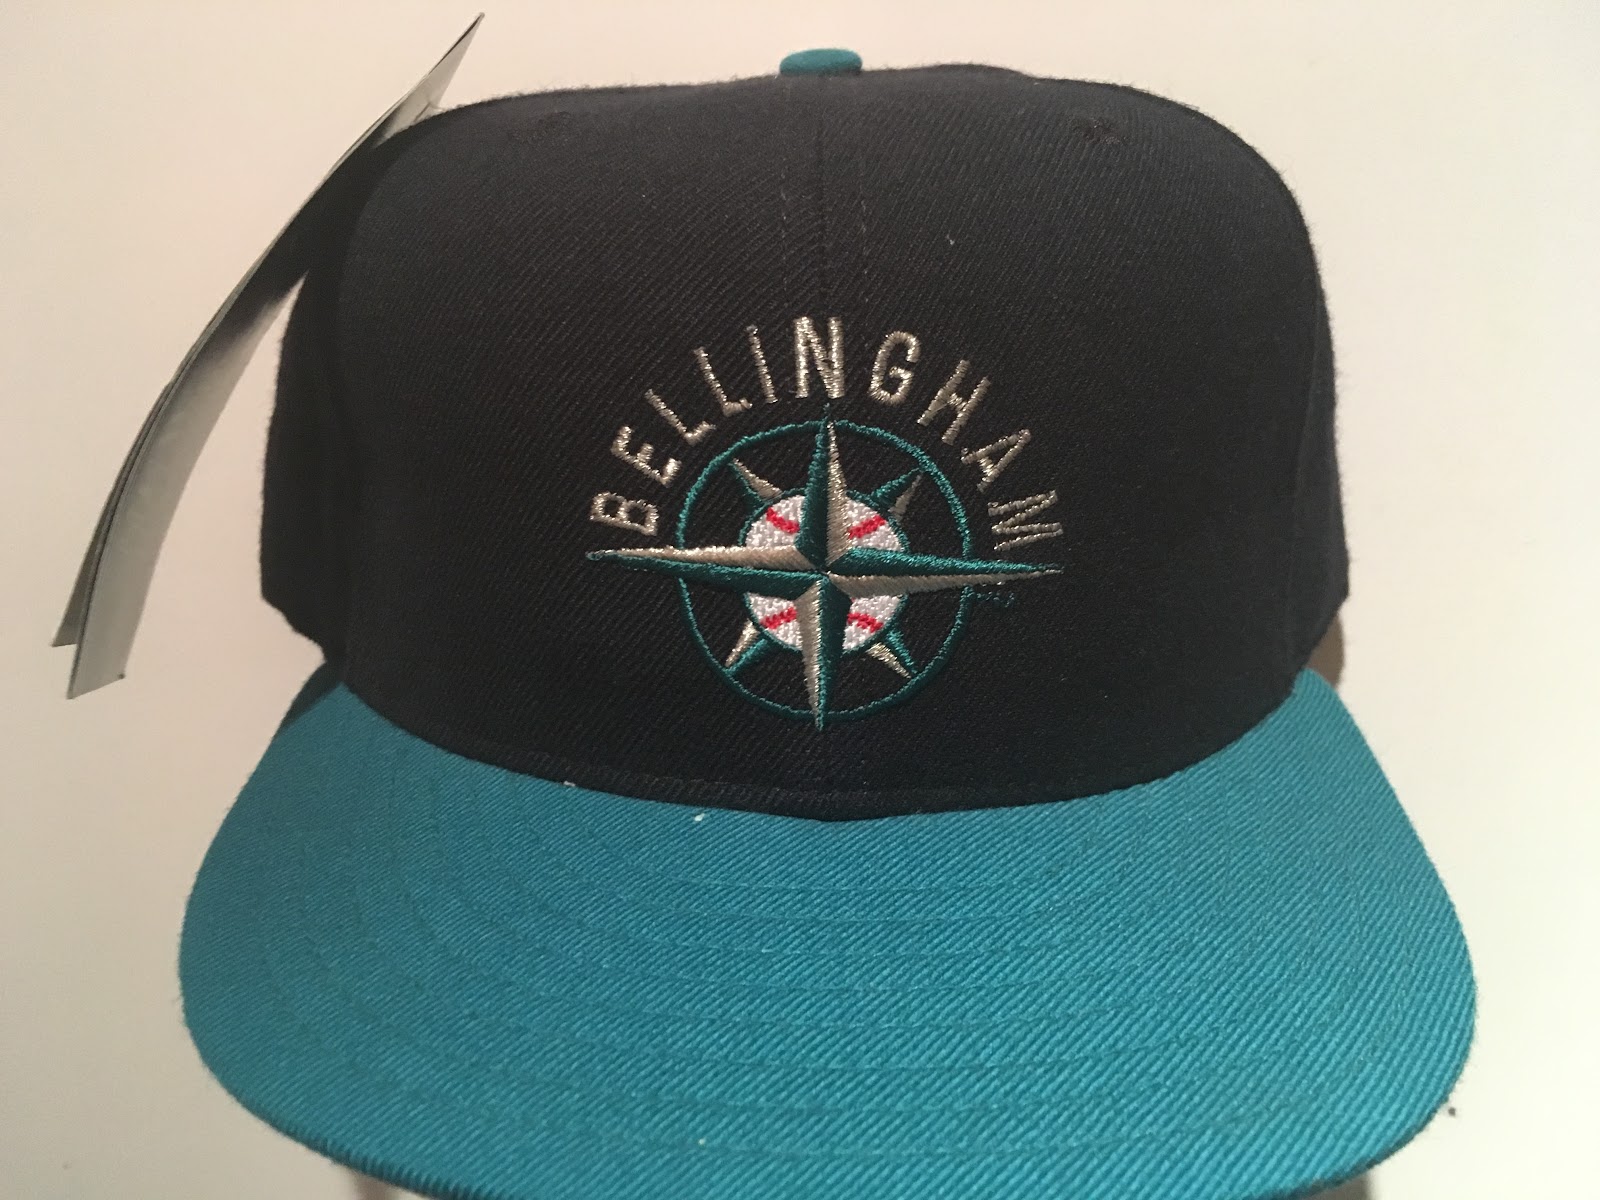 mariners retro jersey giveaway